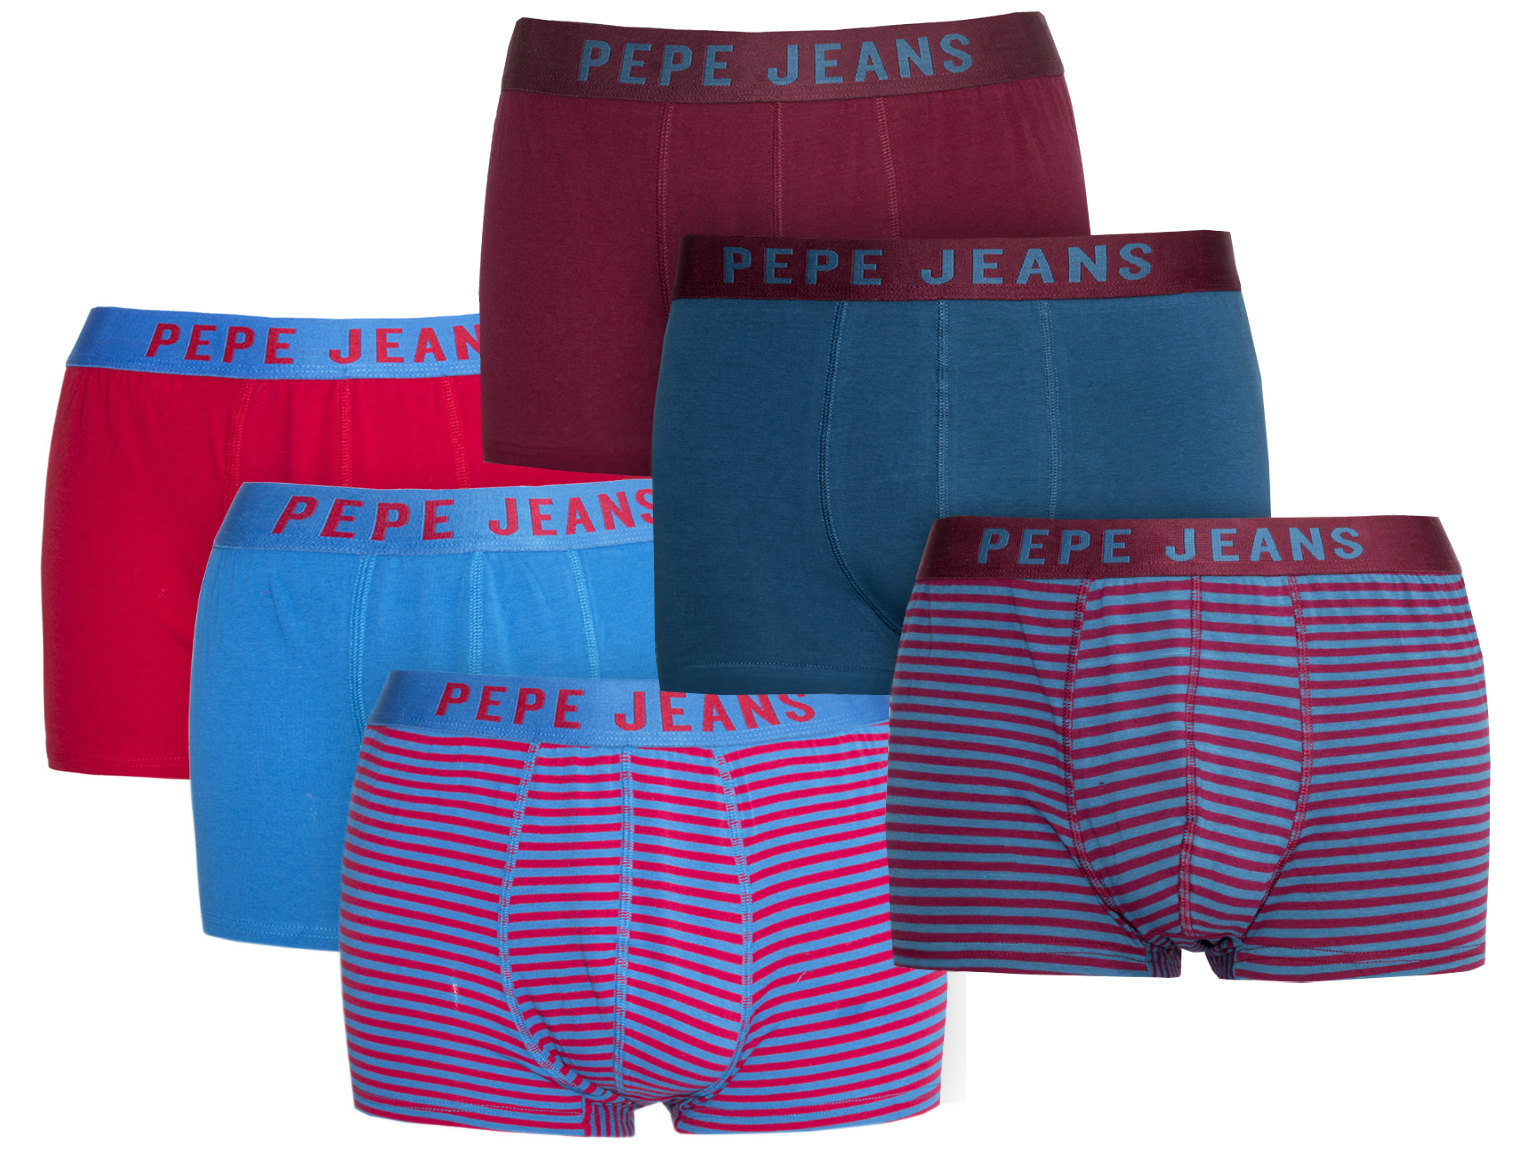 PEPE JEANS Mens Designer Casual Boxers Trunks Shorts 3 Pack Cotton New  Irving